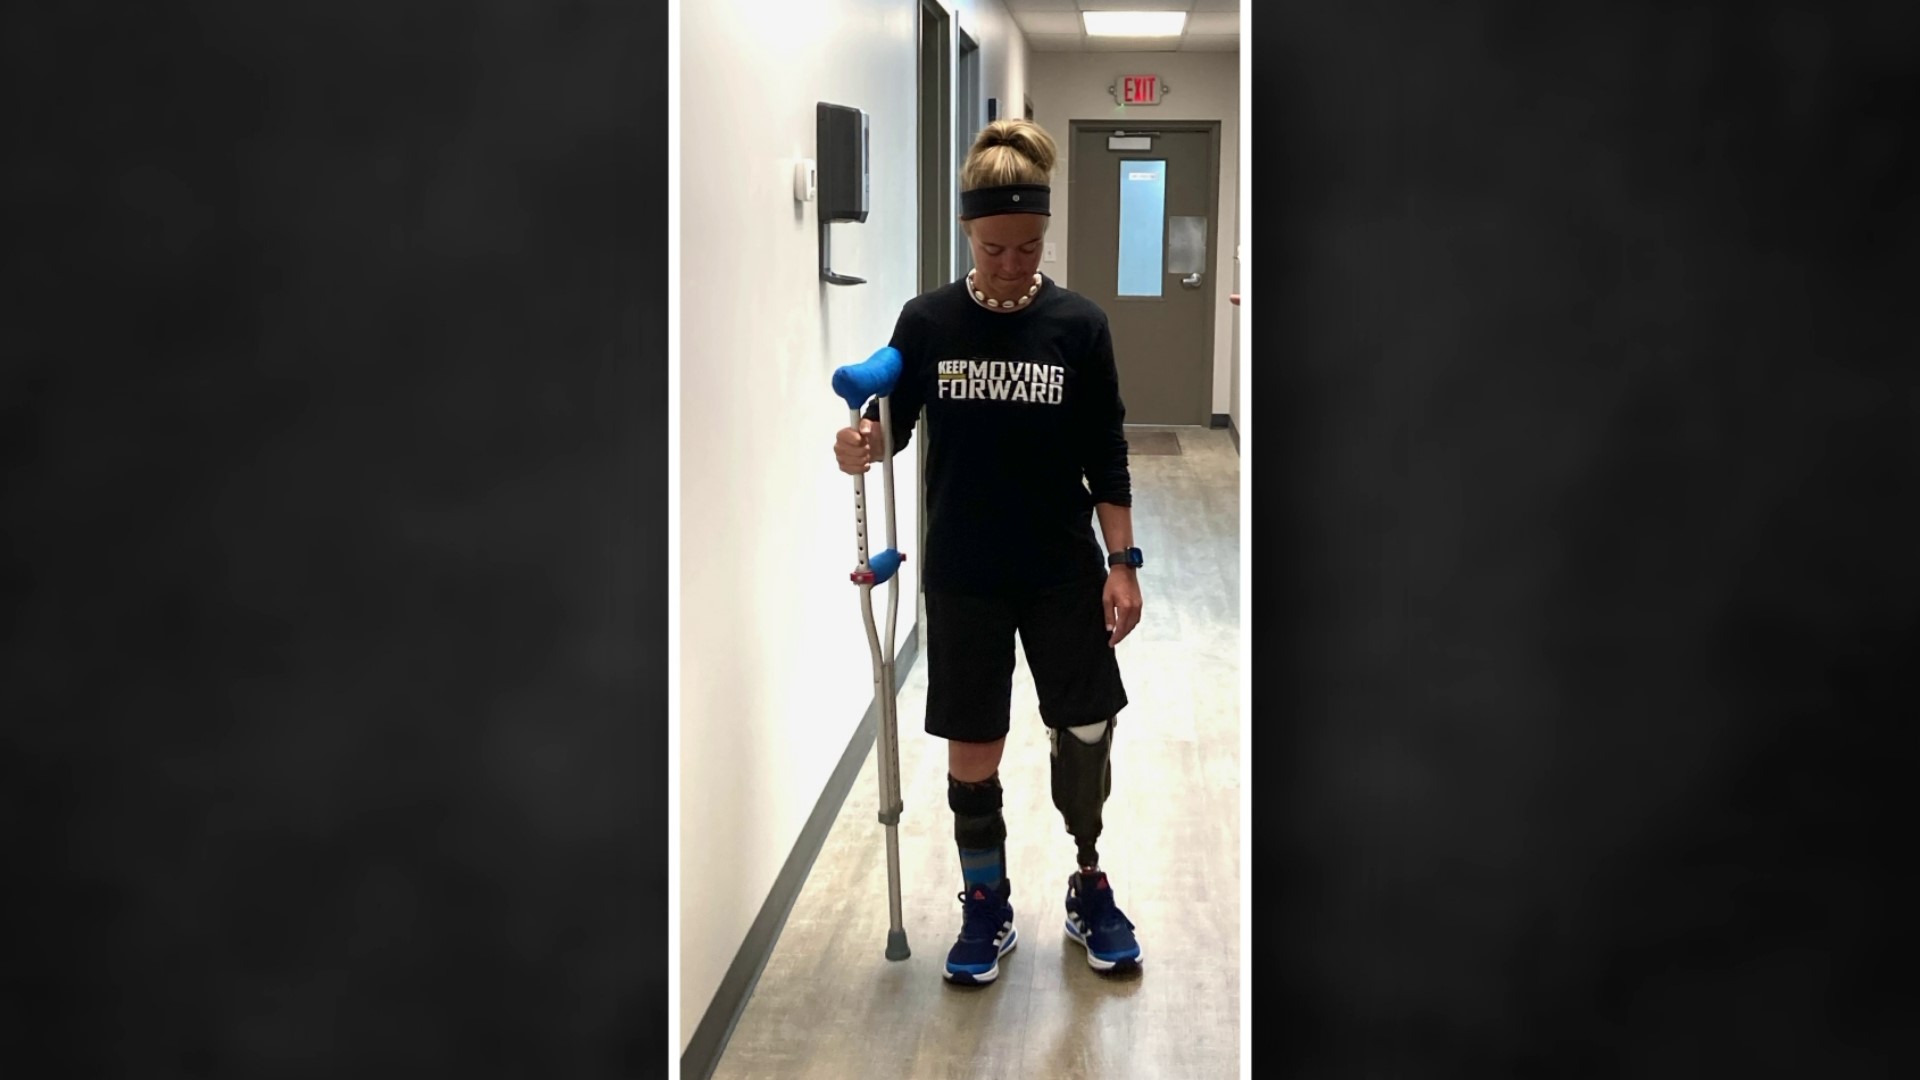 Part of Adaptive Sports Connection is amputee soccer. It's an opportunity for those who have suffered a limb loss to come and play the game they love.